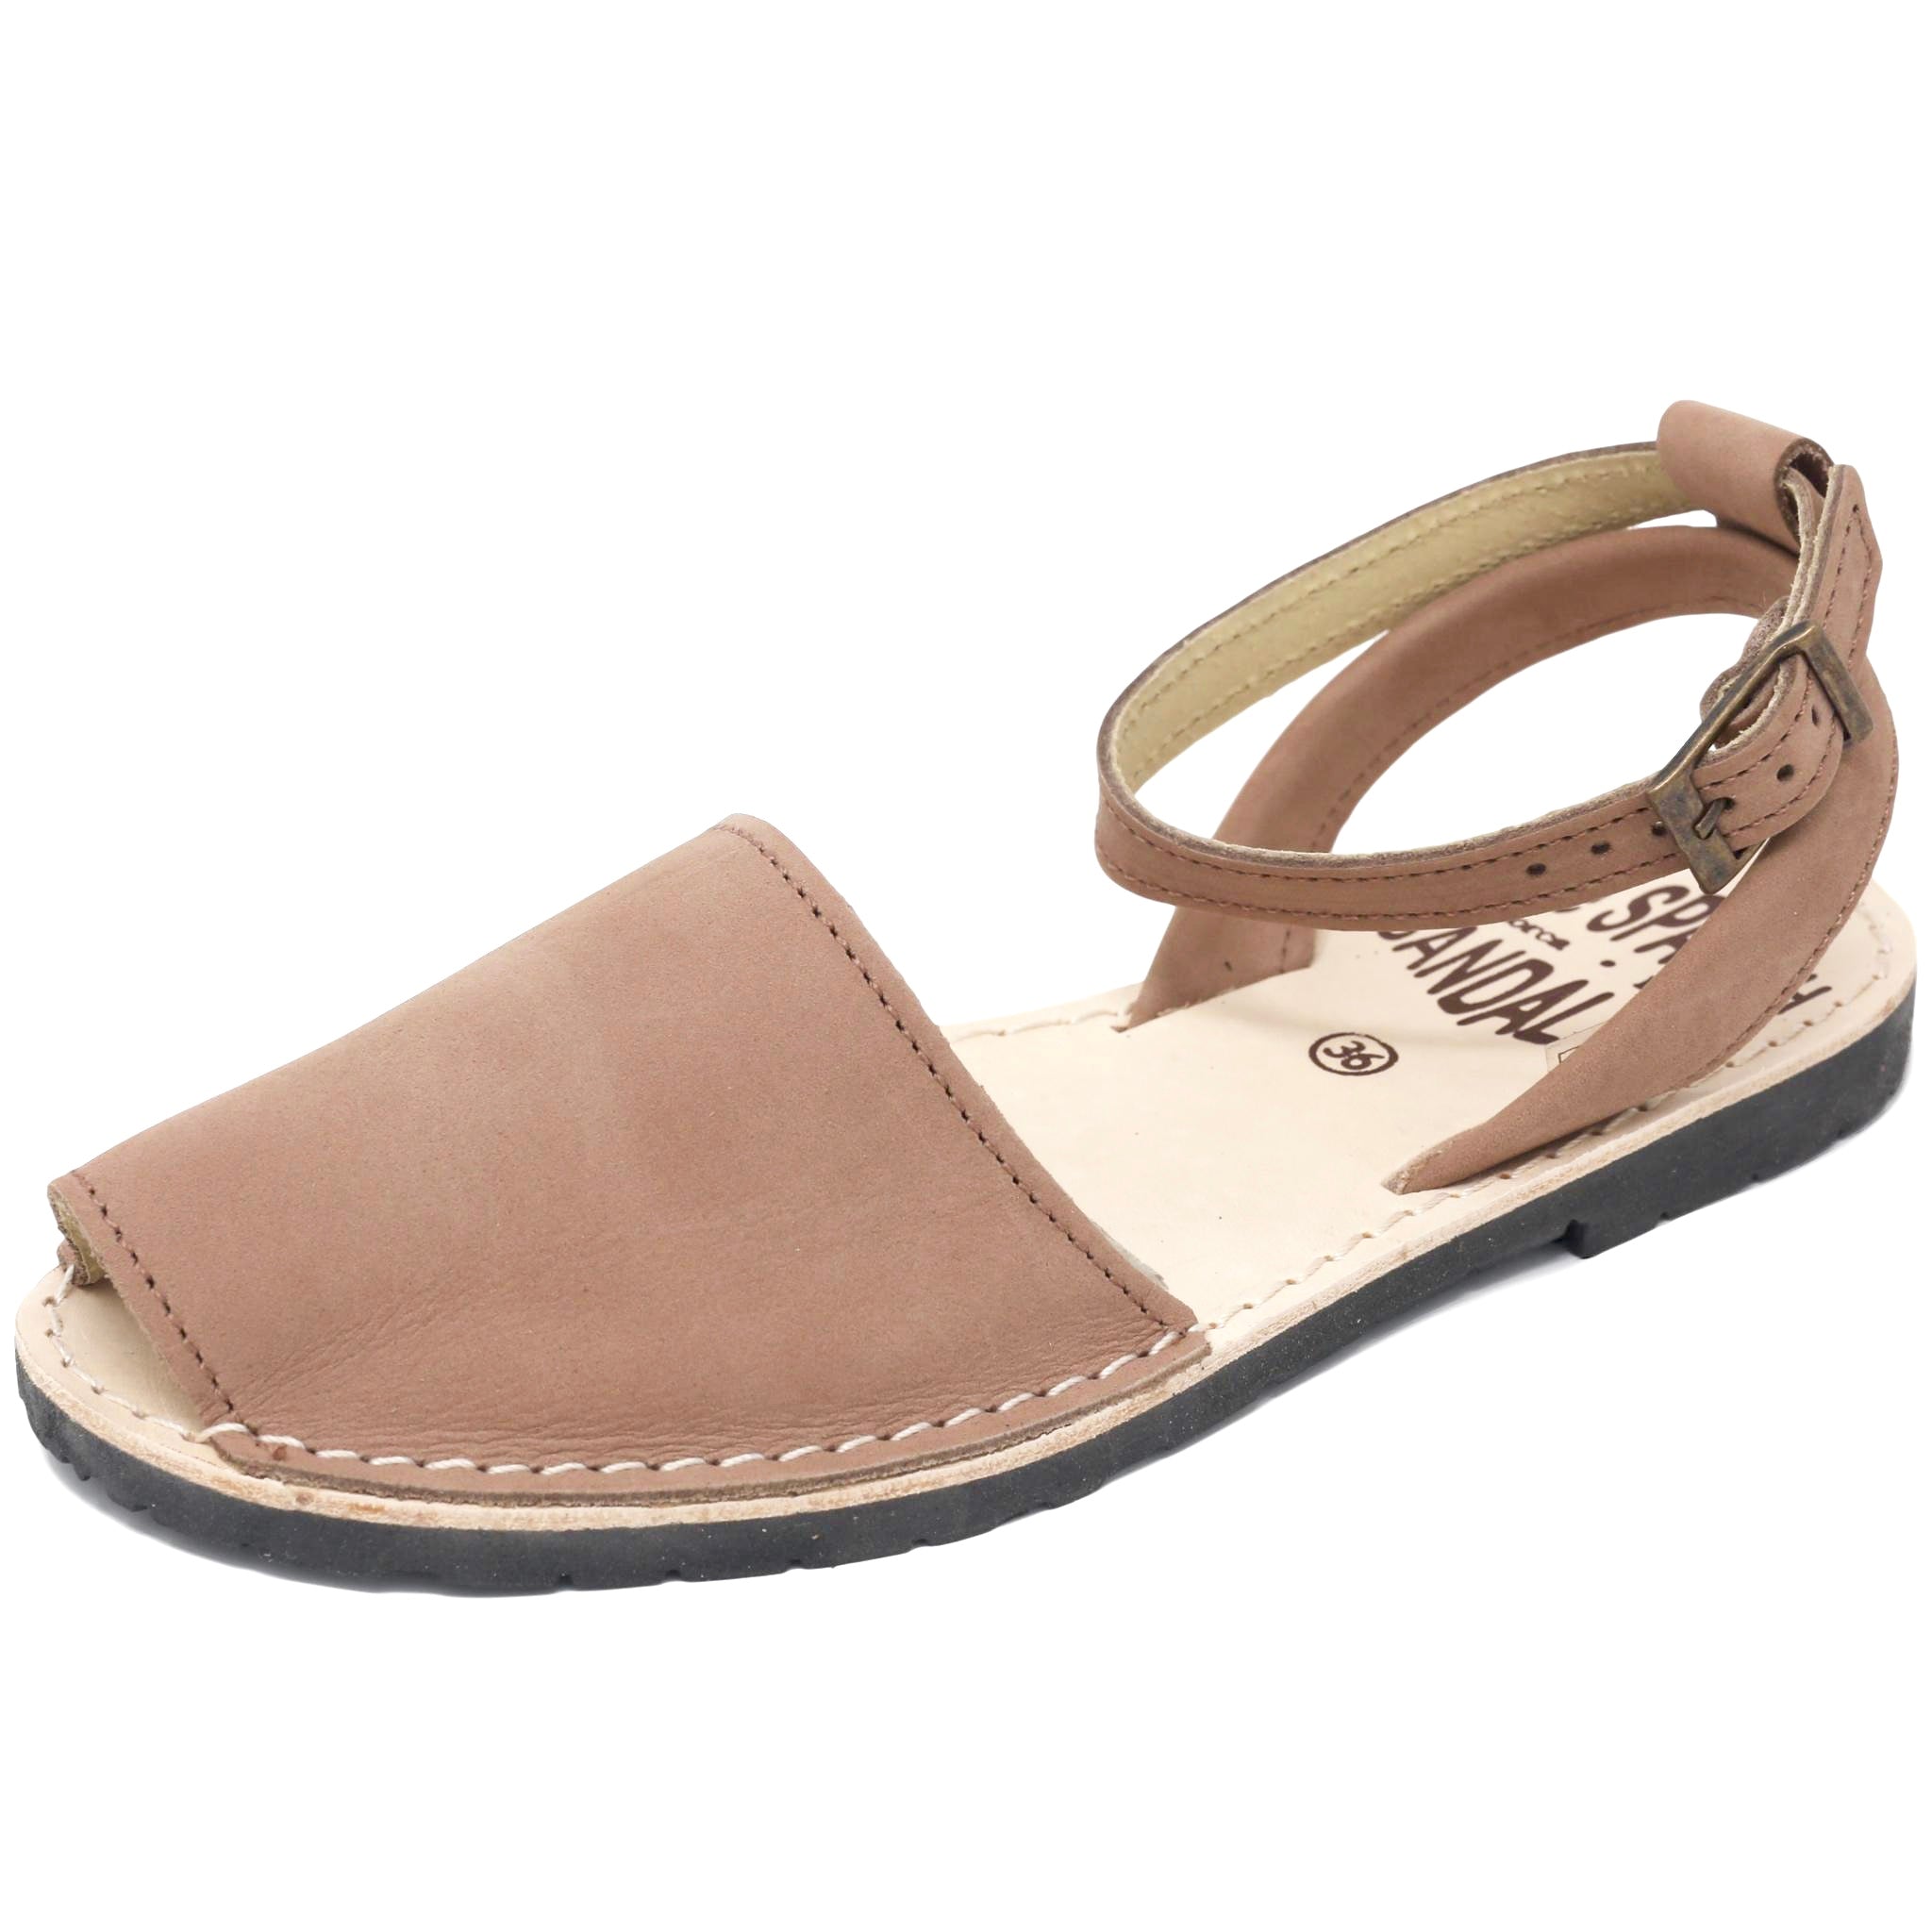 Tan nubuck sandals with strap - The Spanish Sandal Company